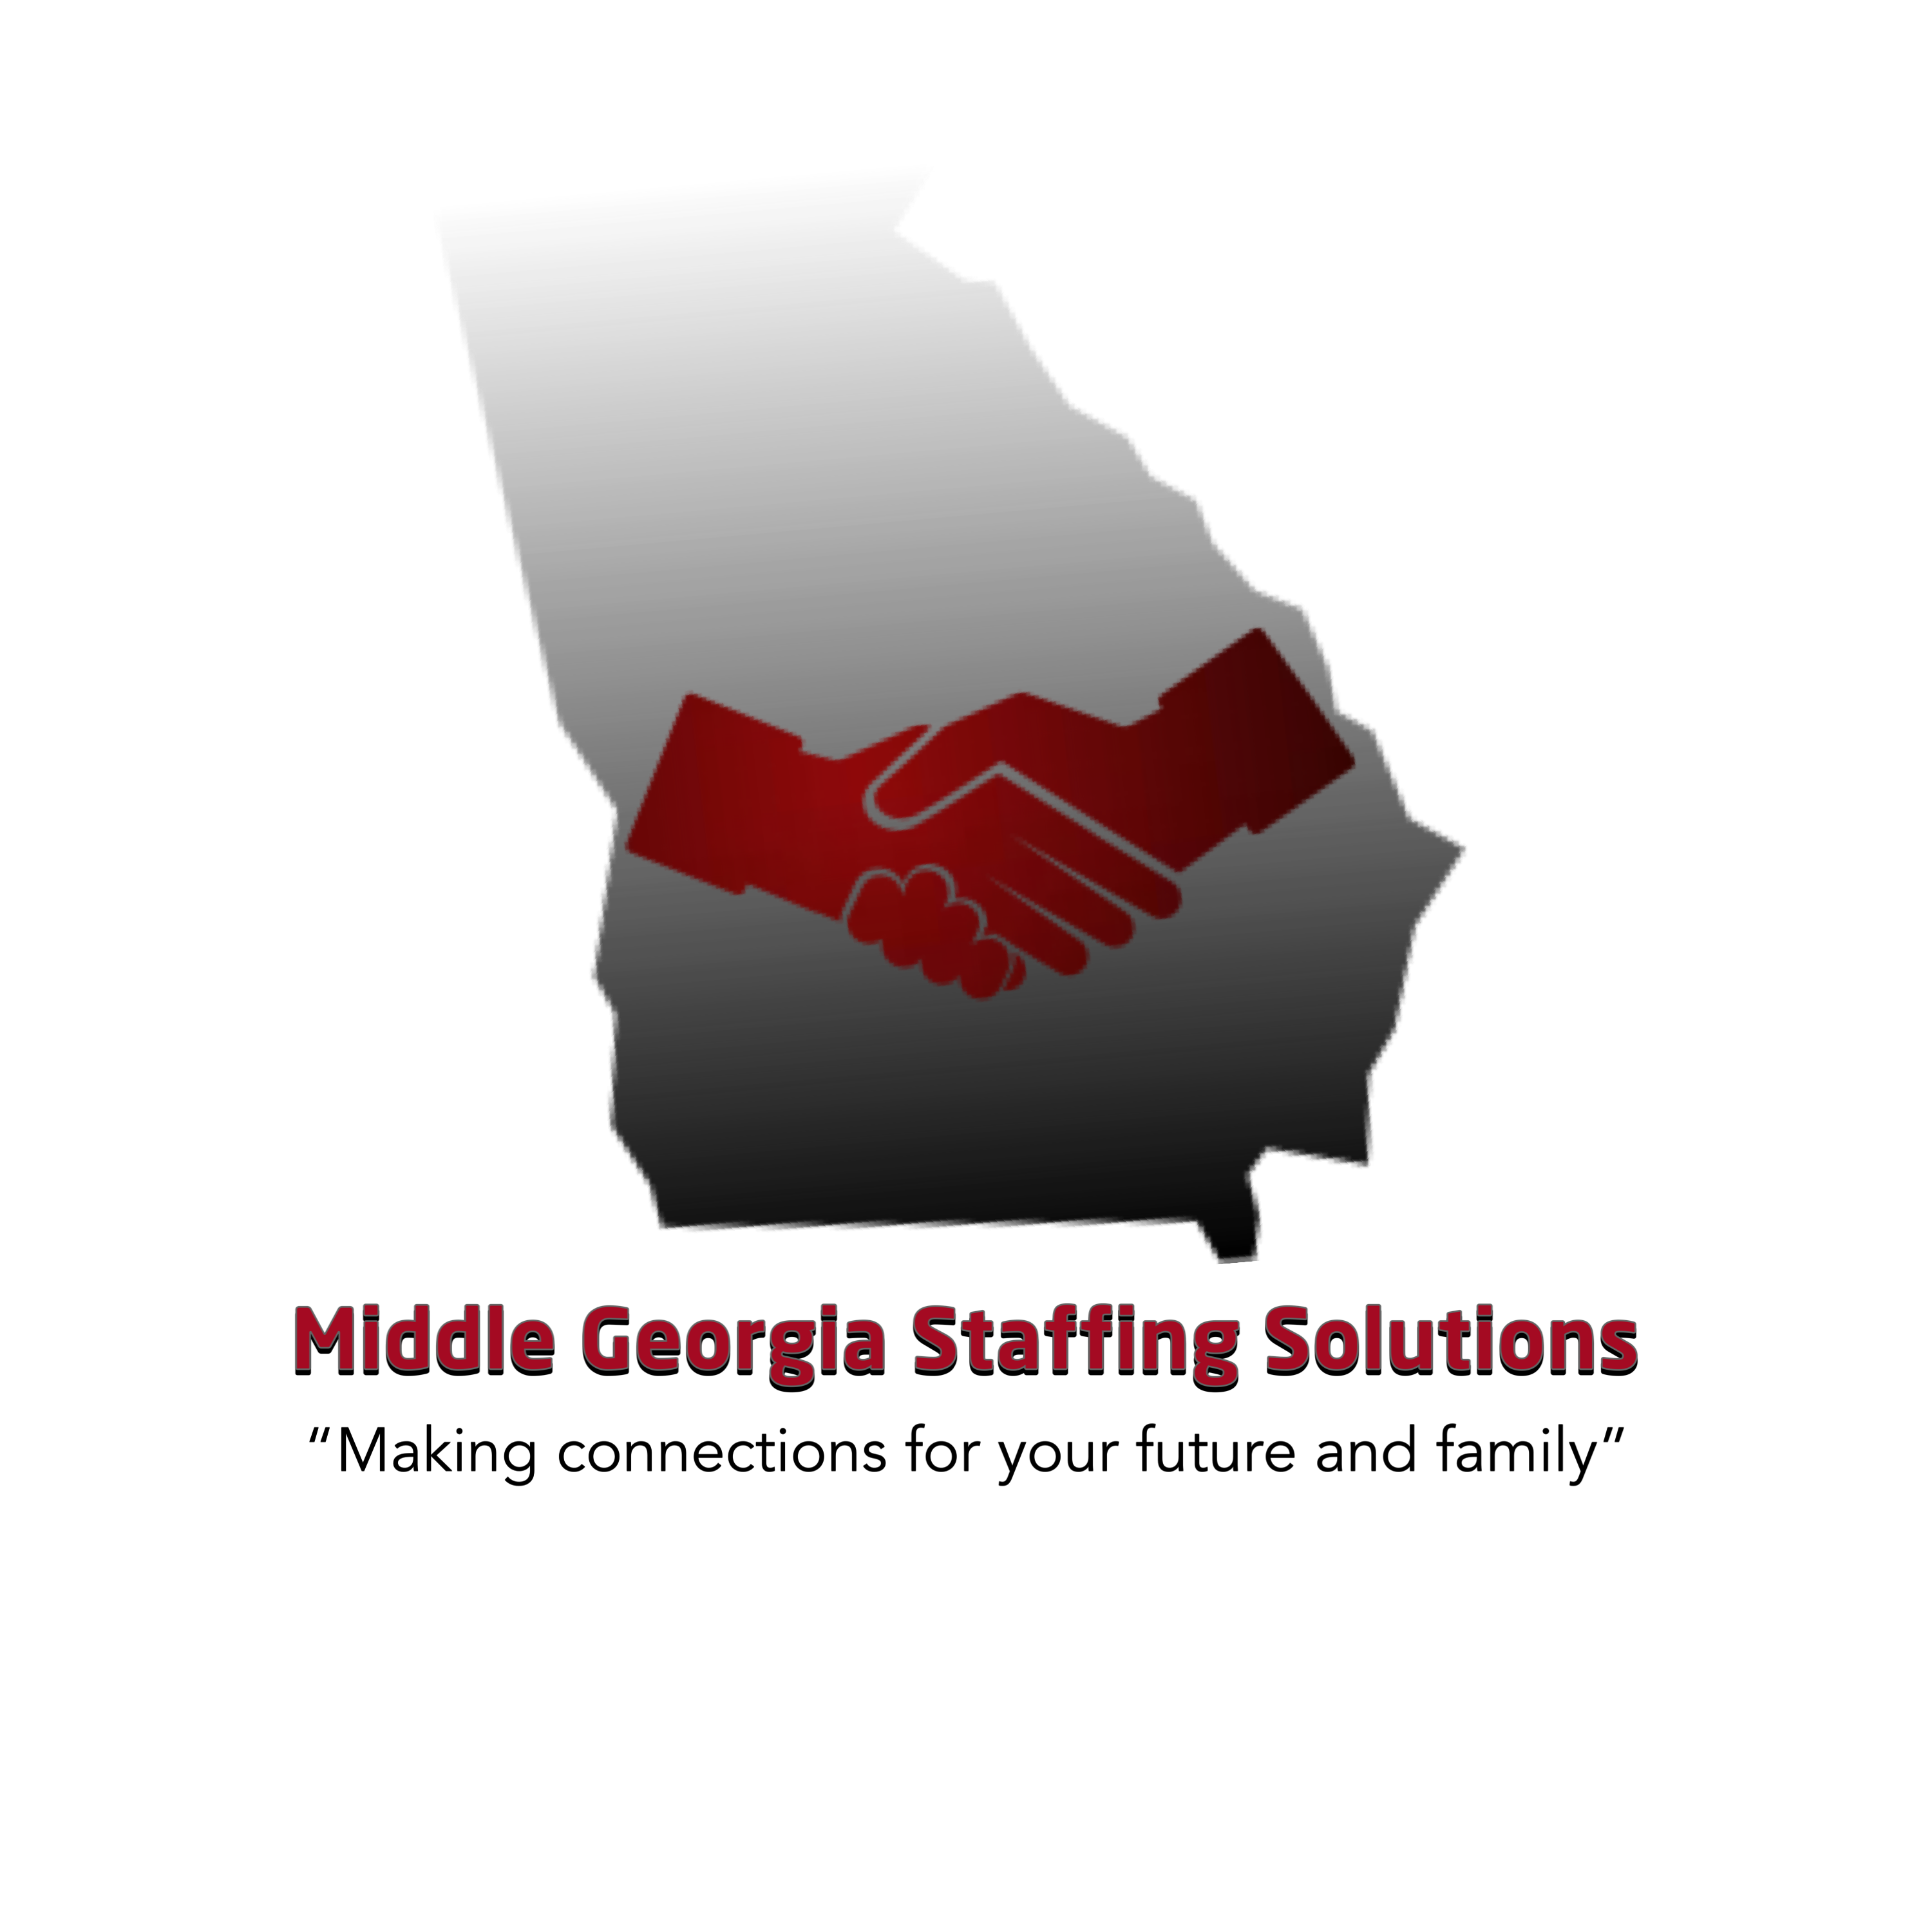 Middle Georgia Staffing Solutions Emerges As The Most Trusted Hiring Professionals In Bibb County And Surrounding Areas